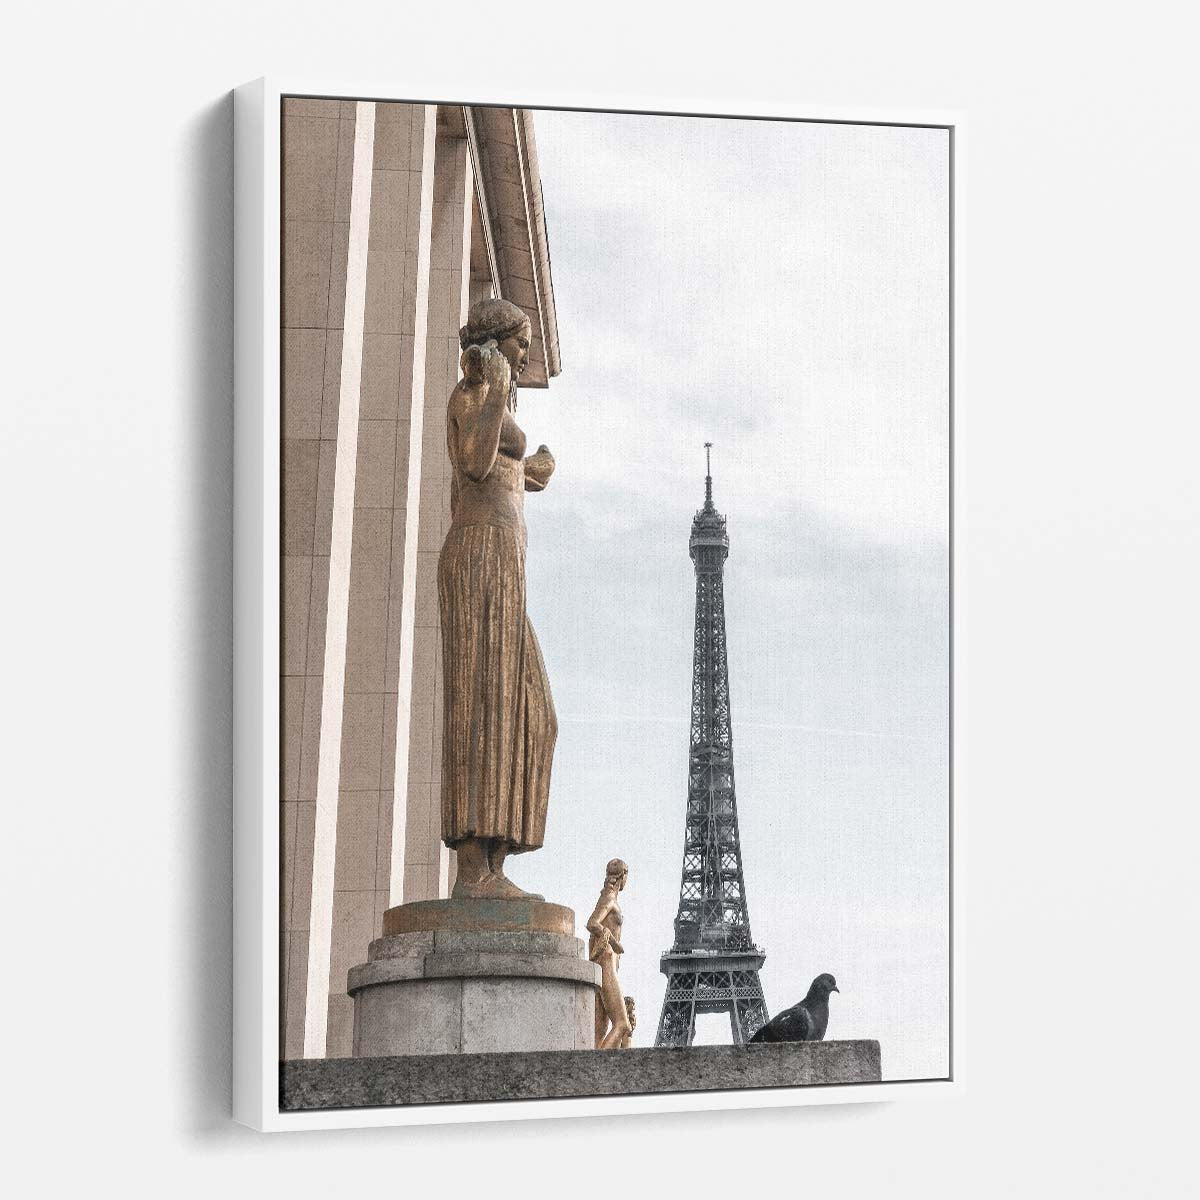 Iconic Eiffel Tower Paris Photography Dove at Trocadero, Urban Cityscape by Luxuriance Designs, made in USA